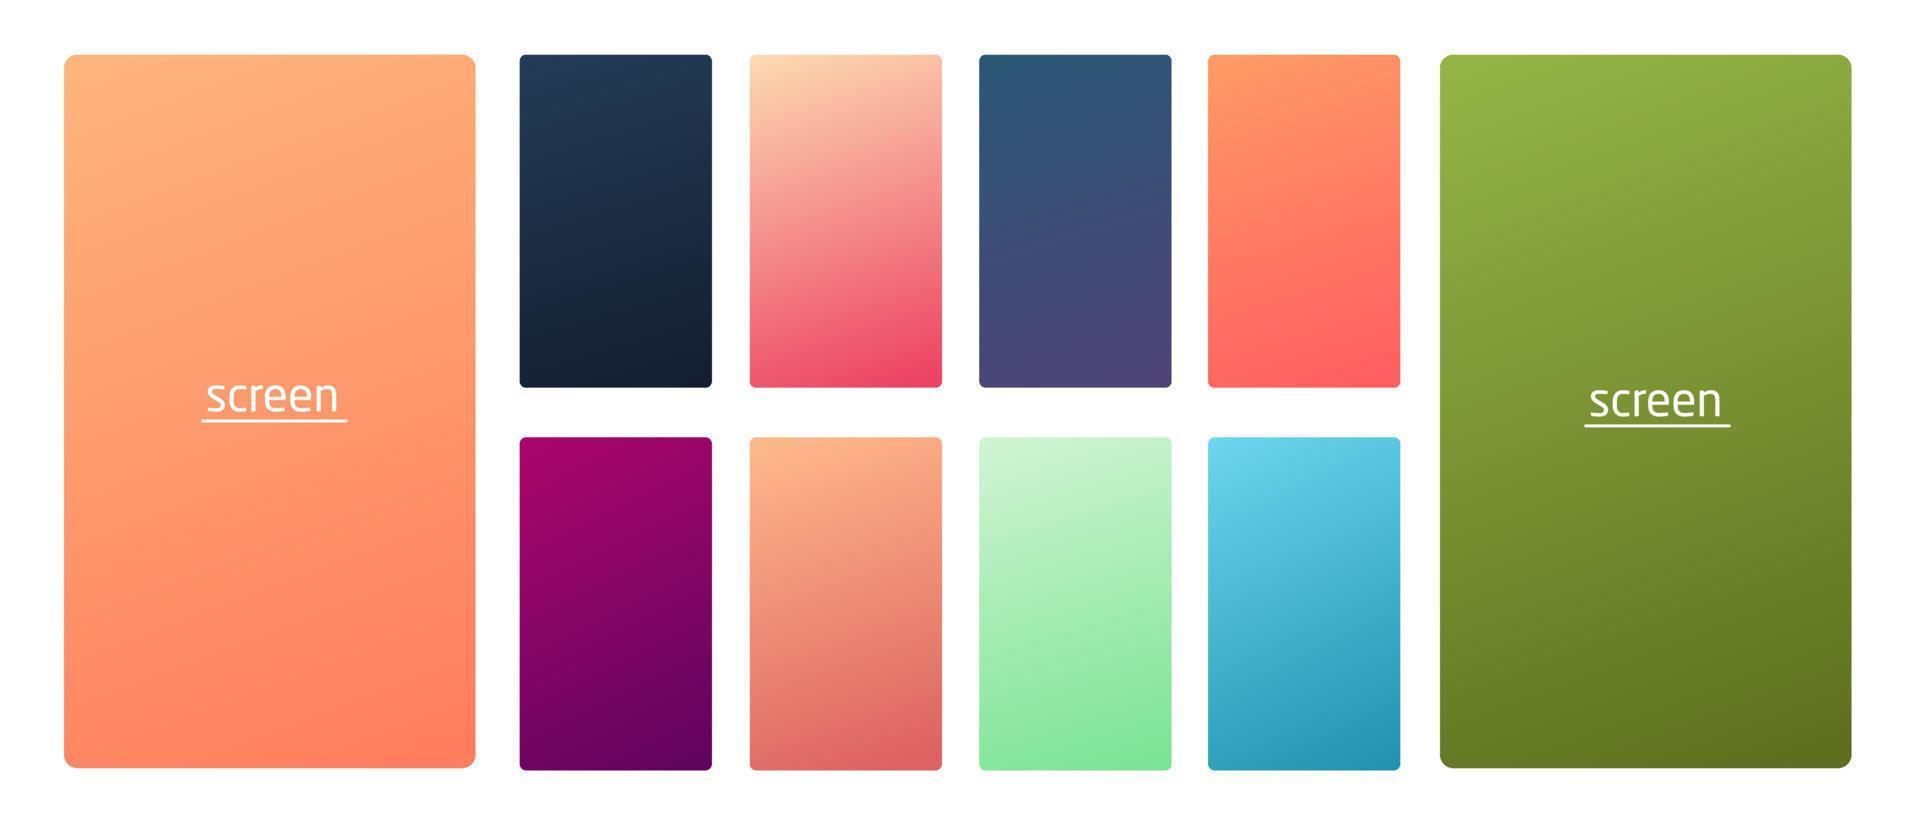 Vibrant and soft pastel gradient smooth color background set for devices, pc and modern smartphone screen soft pastel color backgrounds vector ux and ui design illustration.